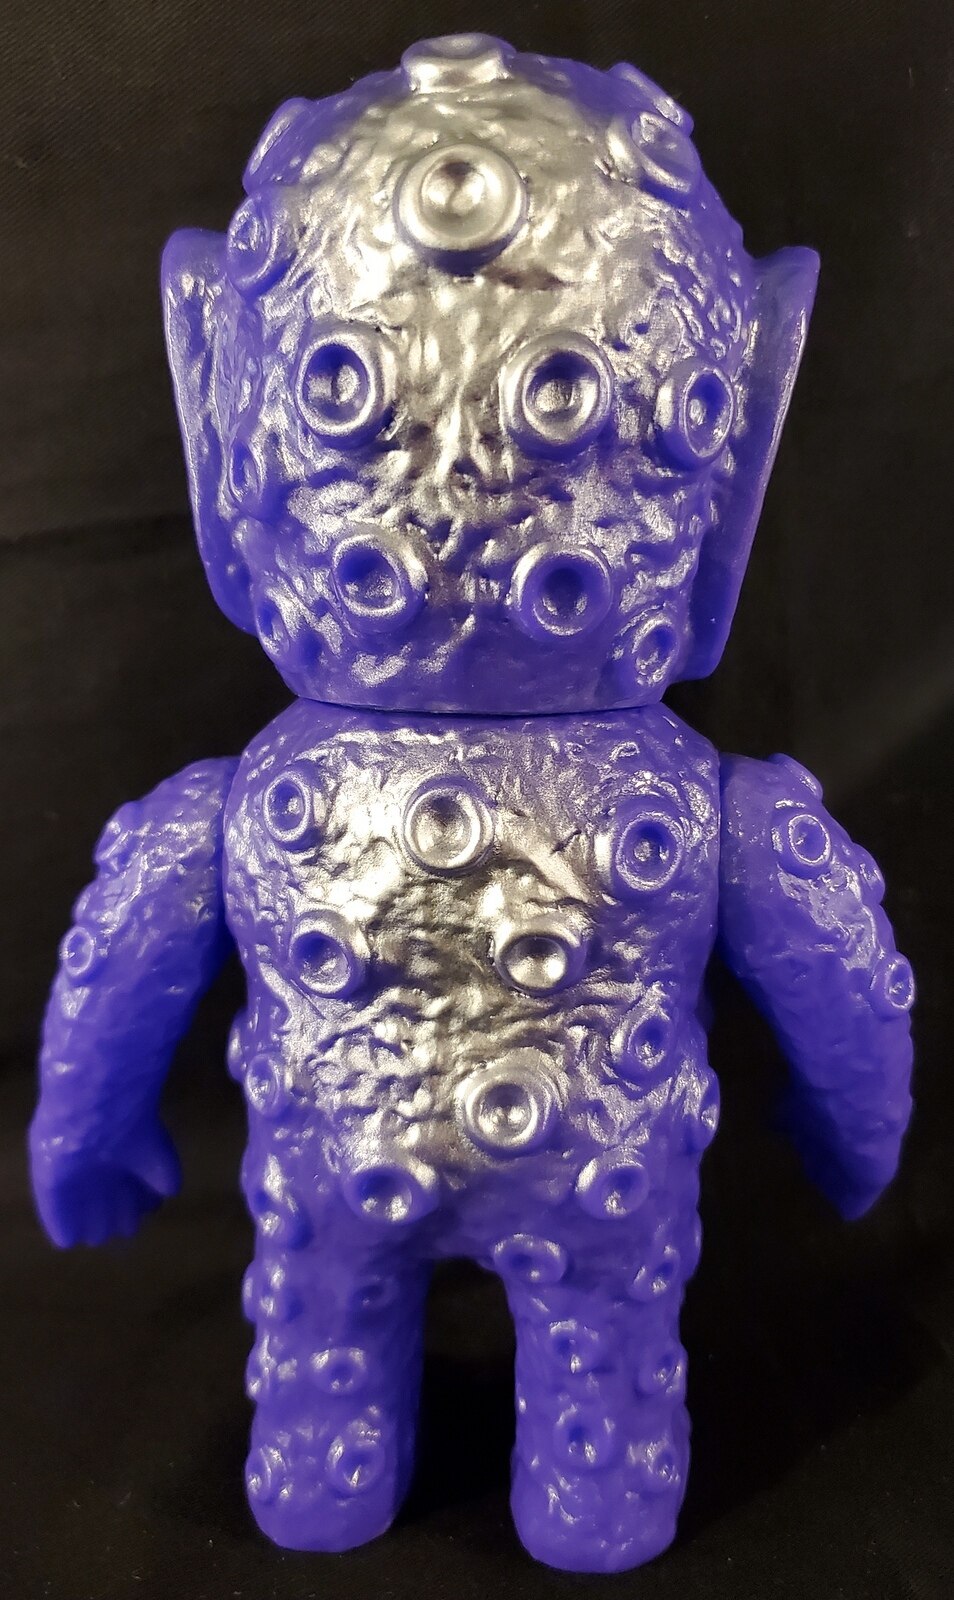 unpainted Details about   Target Earth crater Man purple molded